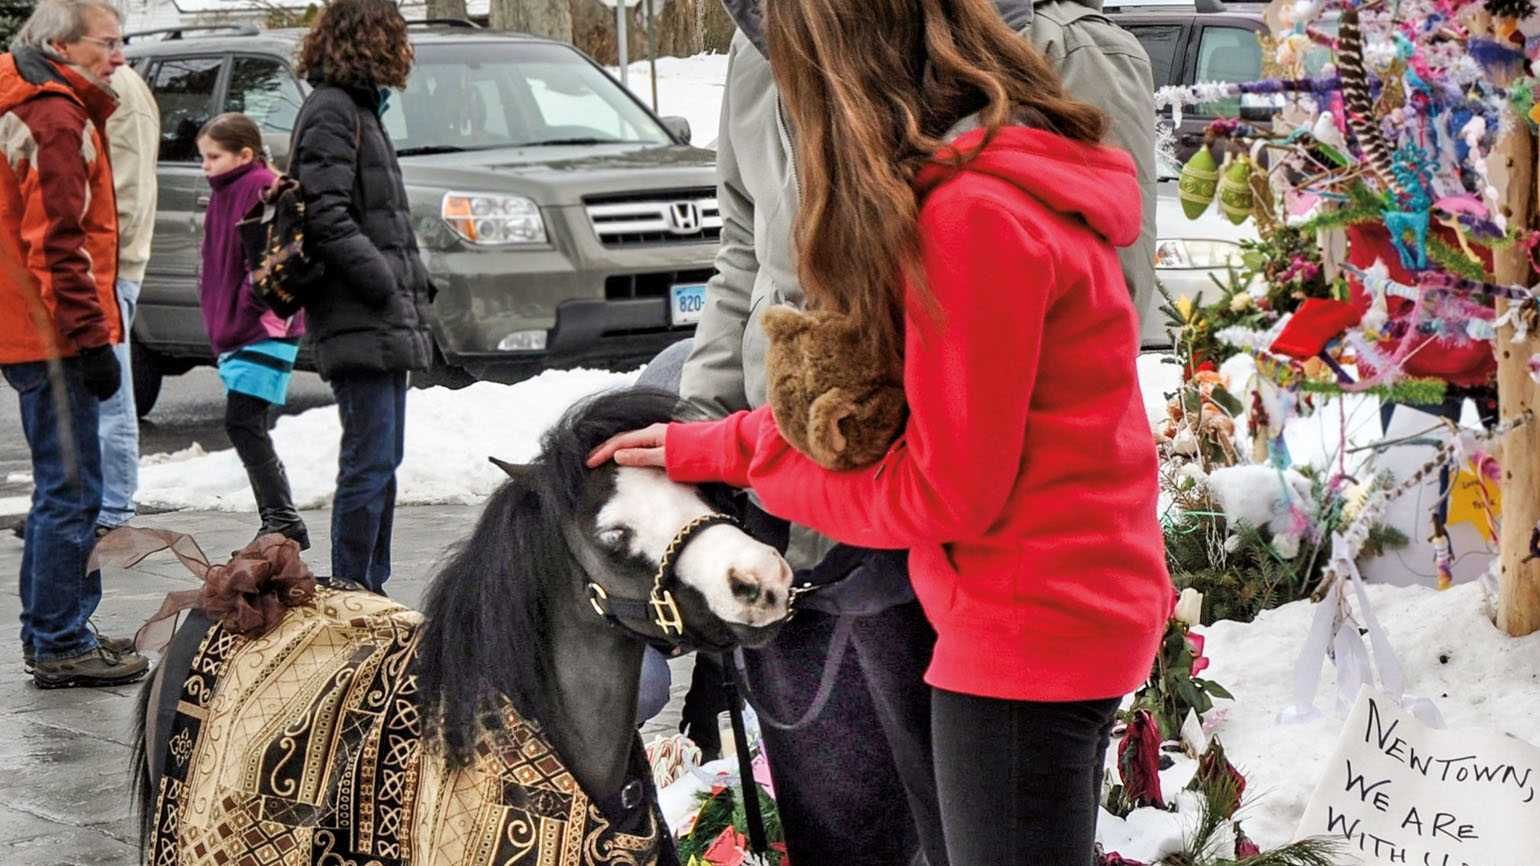 Magic the therapy horse comforts kids at Sandy Hook in inspiring stories of animals helping humans